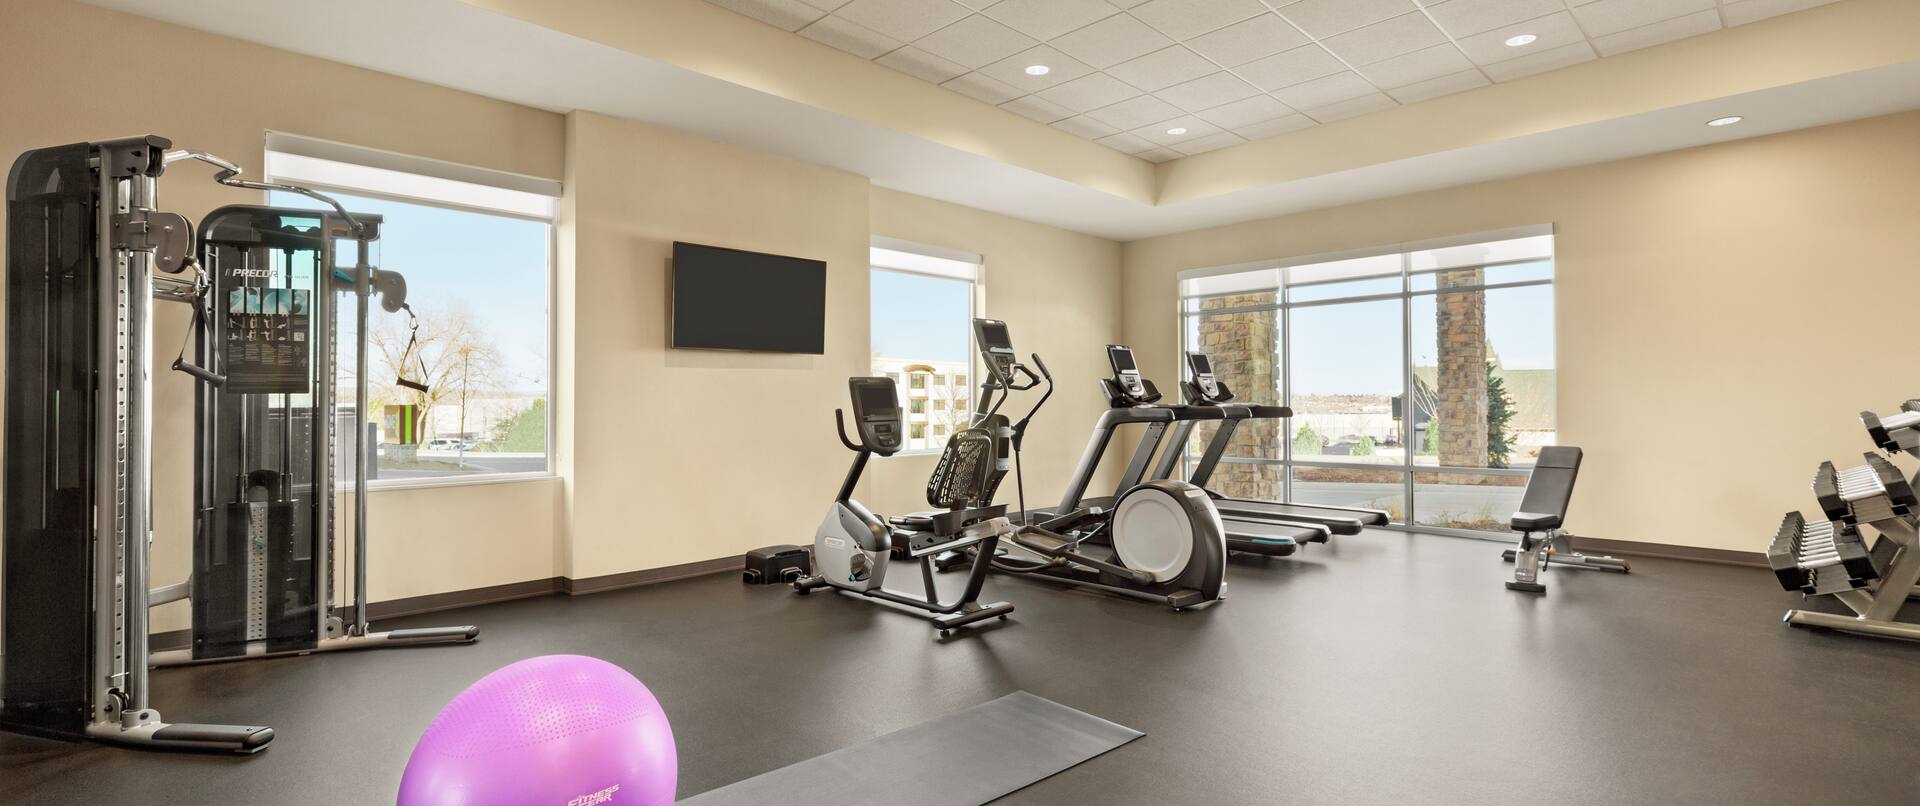 Spacious fitness center featuring floor to ceiling windows, cardio machines, free weights, yoga mats, and TV.